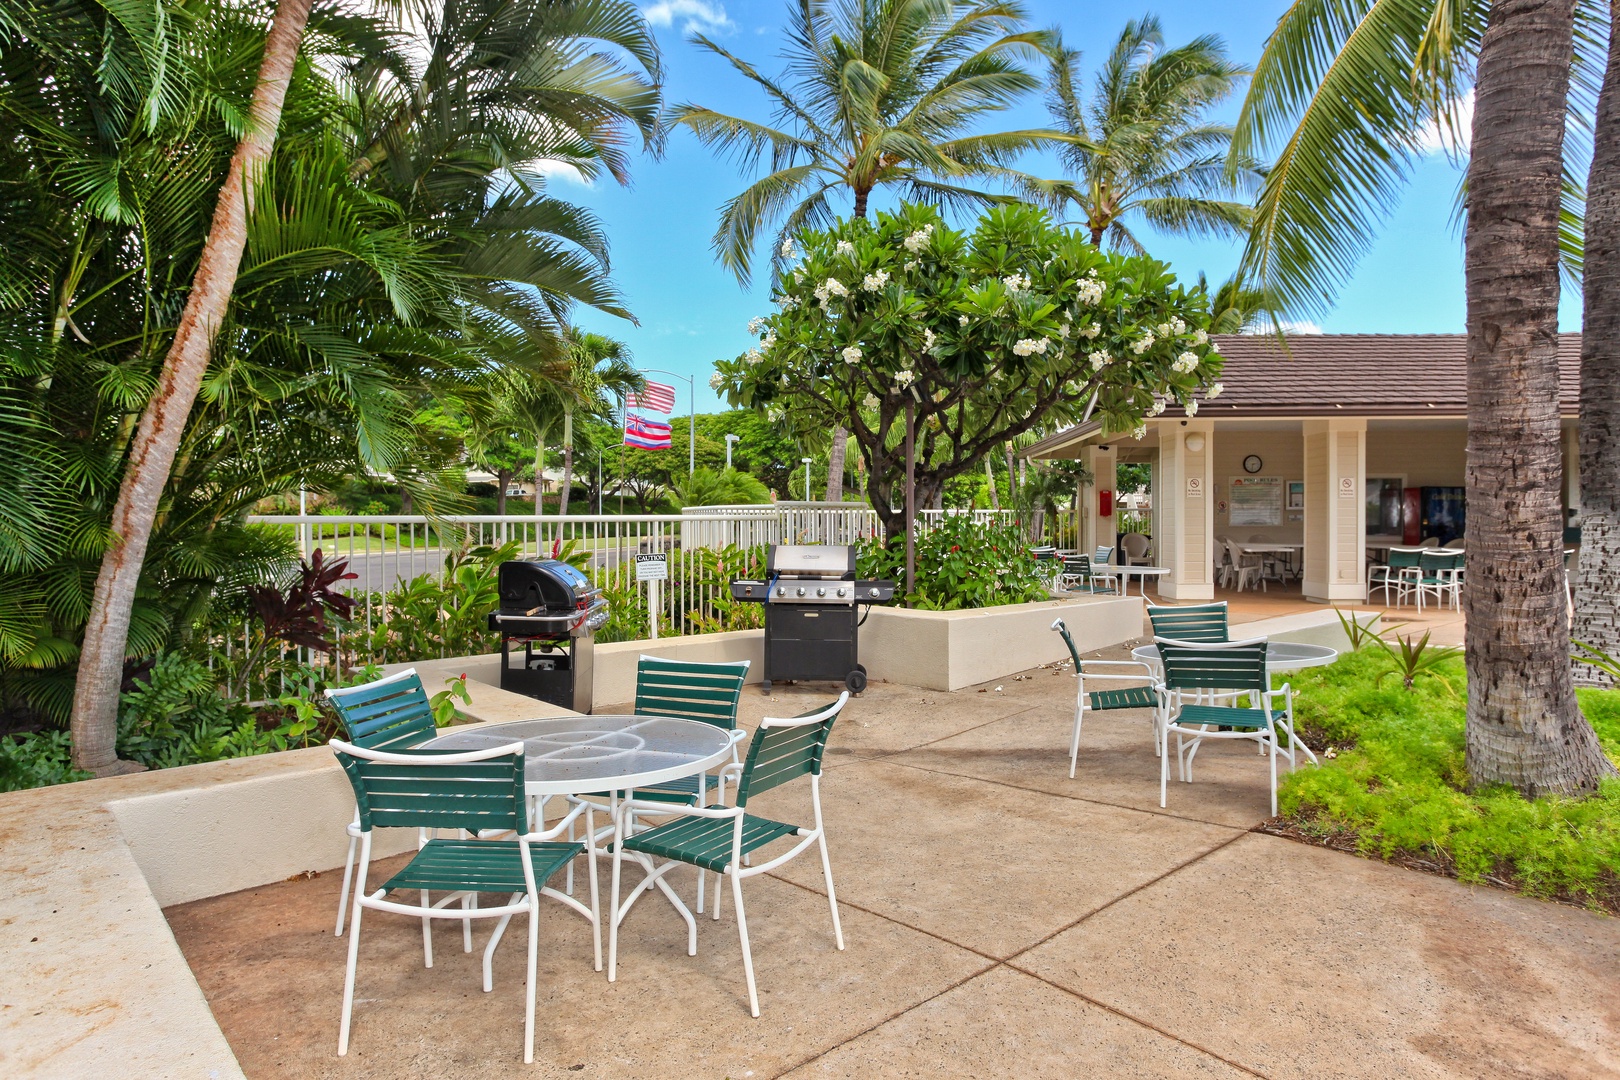 Kapolei Vacation Rentals, Fairways at Ko Olina 20G - Patio seating and BBQ grills near the pool in the fairways at the charming Ko Olina community.